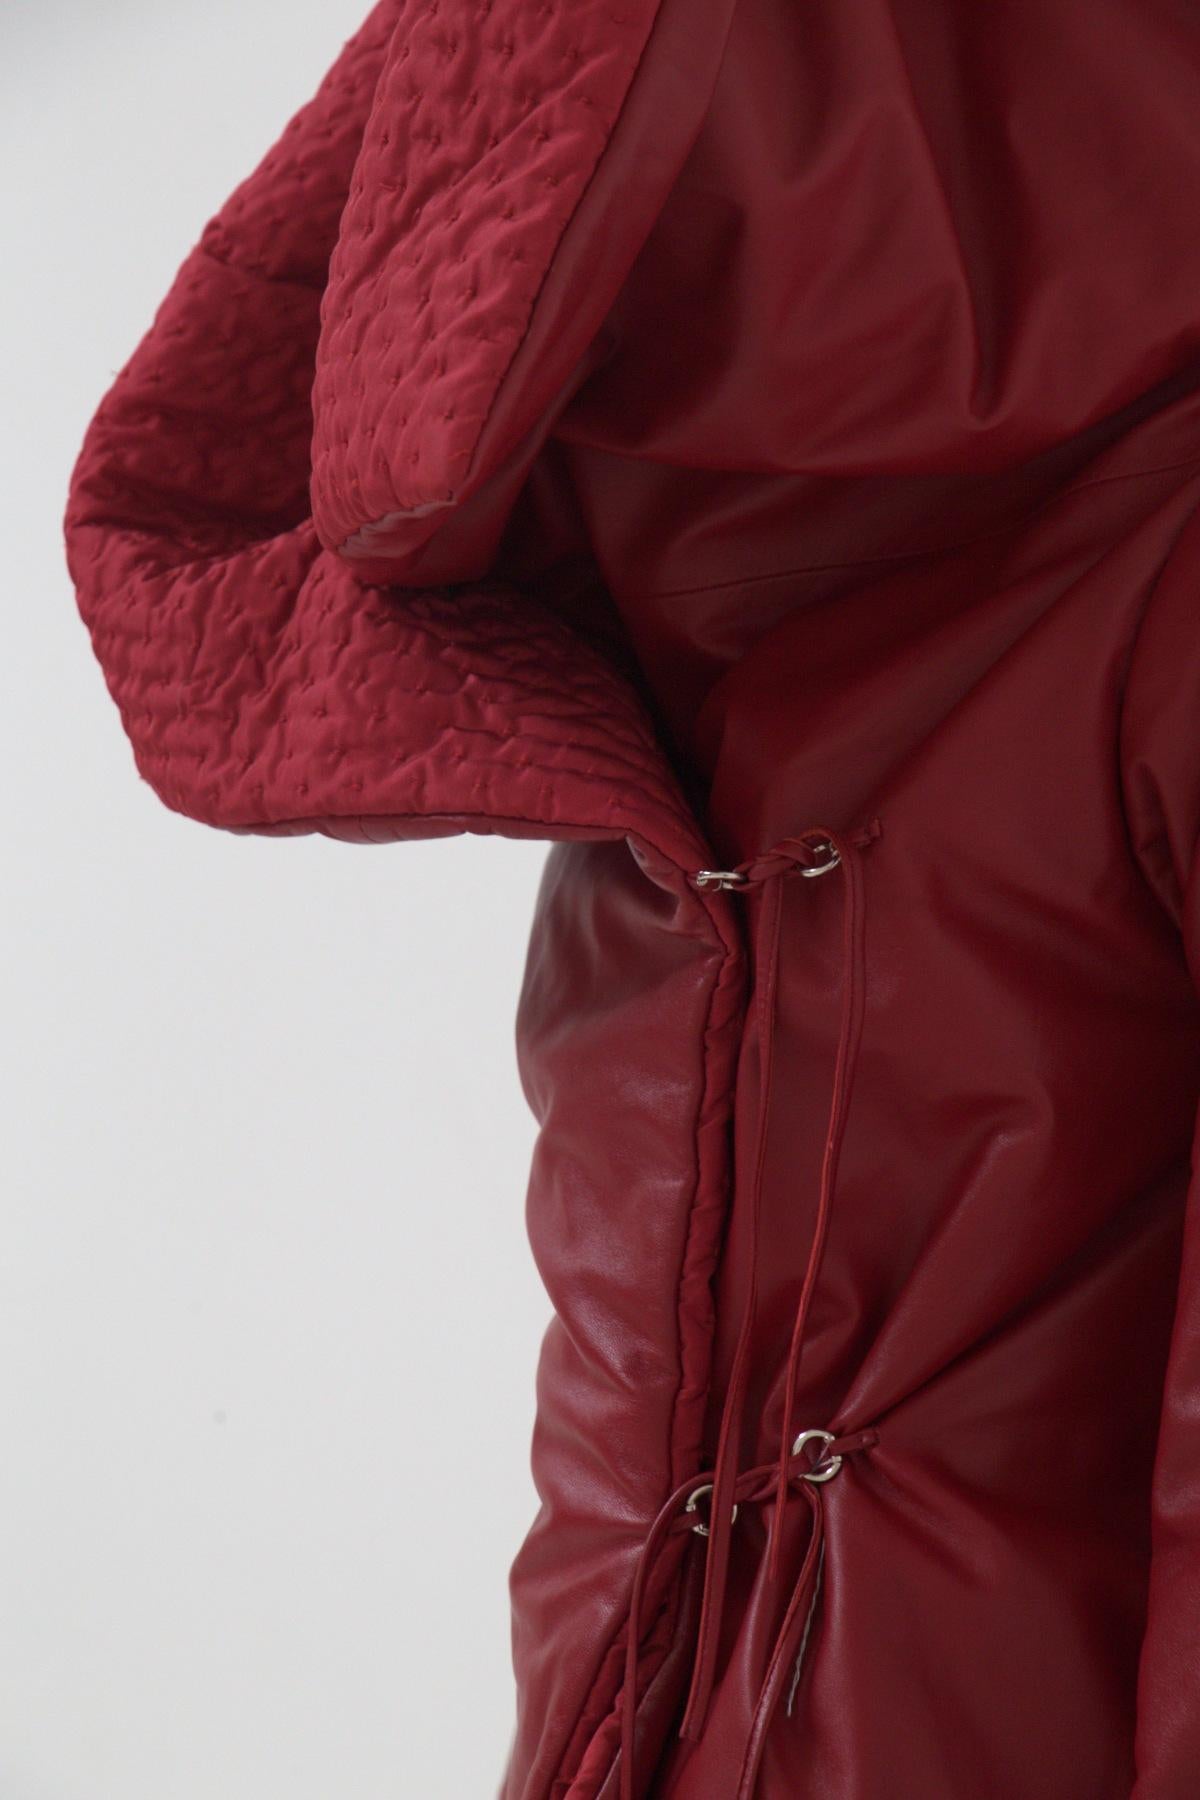 Gianfranco Ferré Rare Oversized Red Leather Jacket For Sale 4